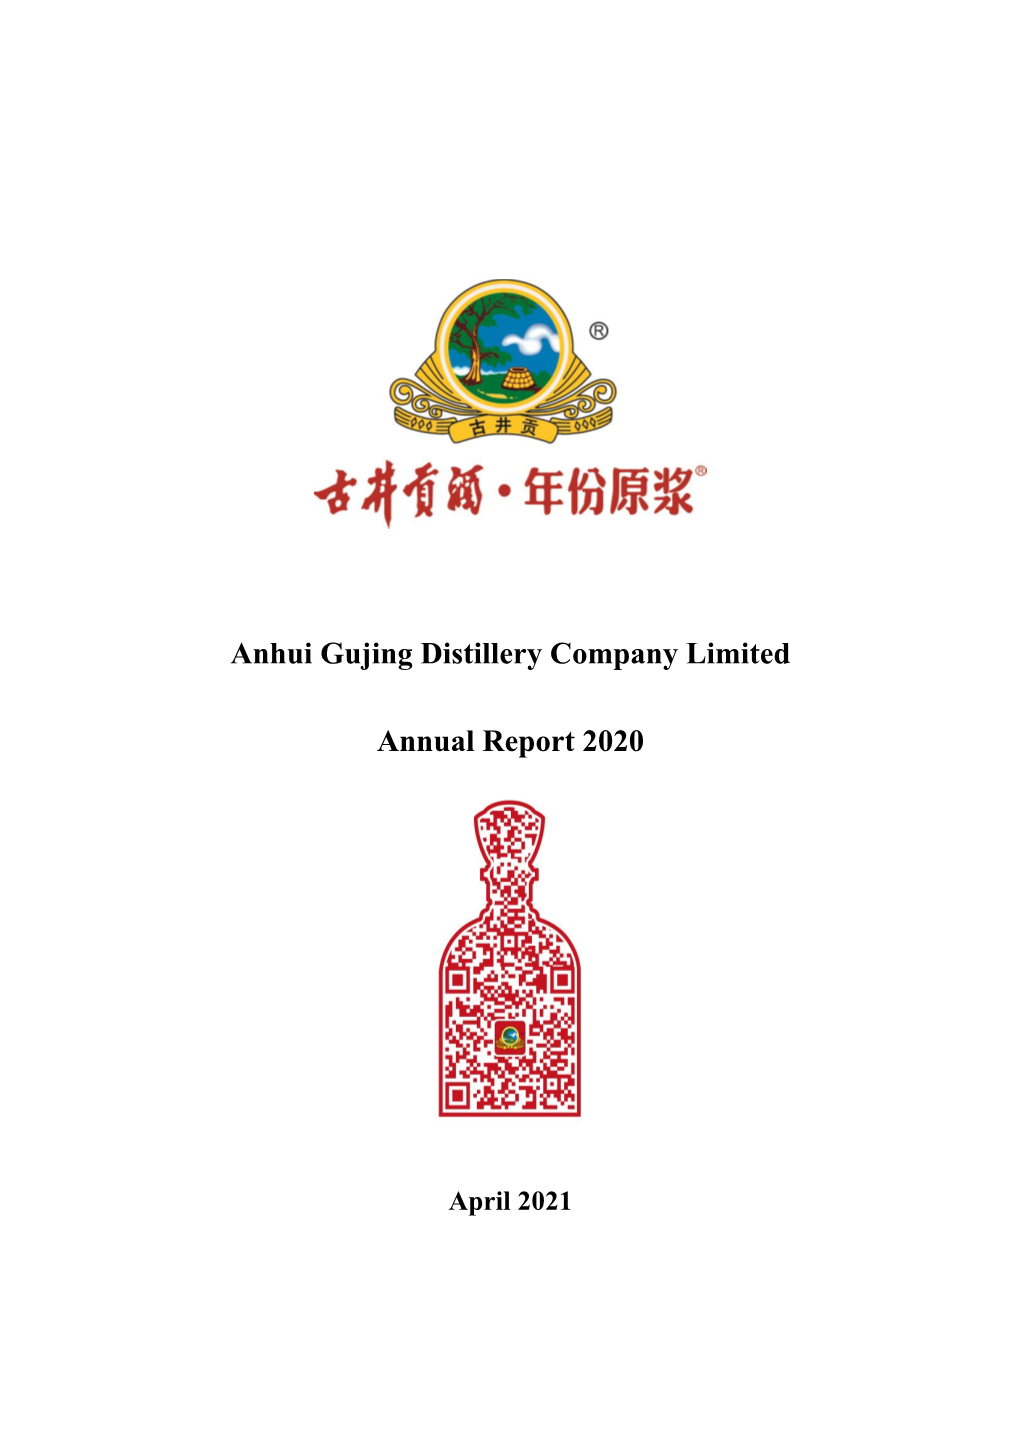 Anhui Gujing Distillery Company Limited Annual Report 2020